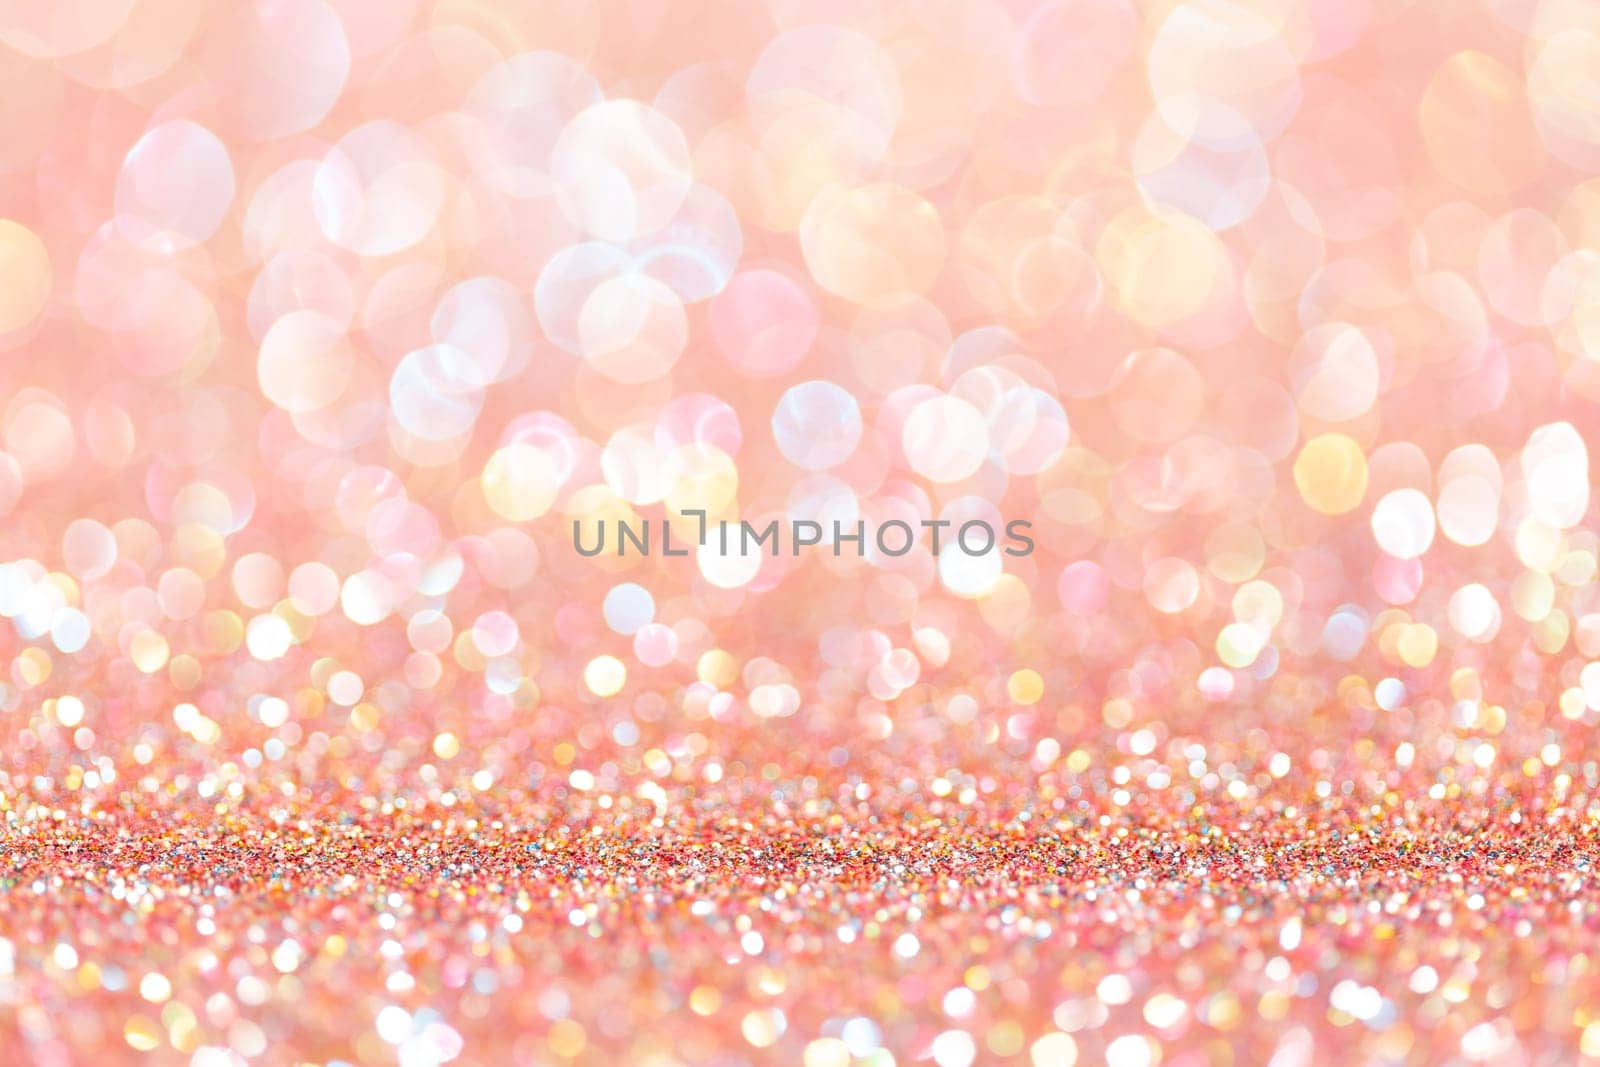 sparkles of rose glitter abstract background. Copy space.